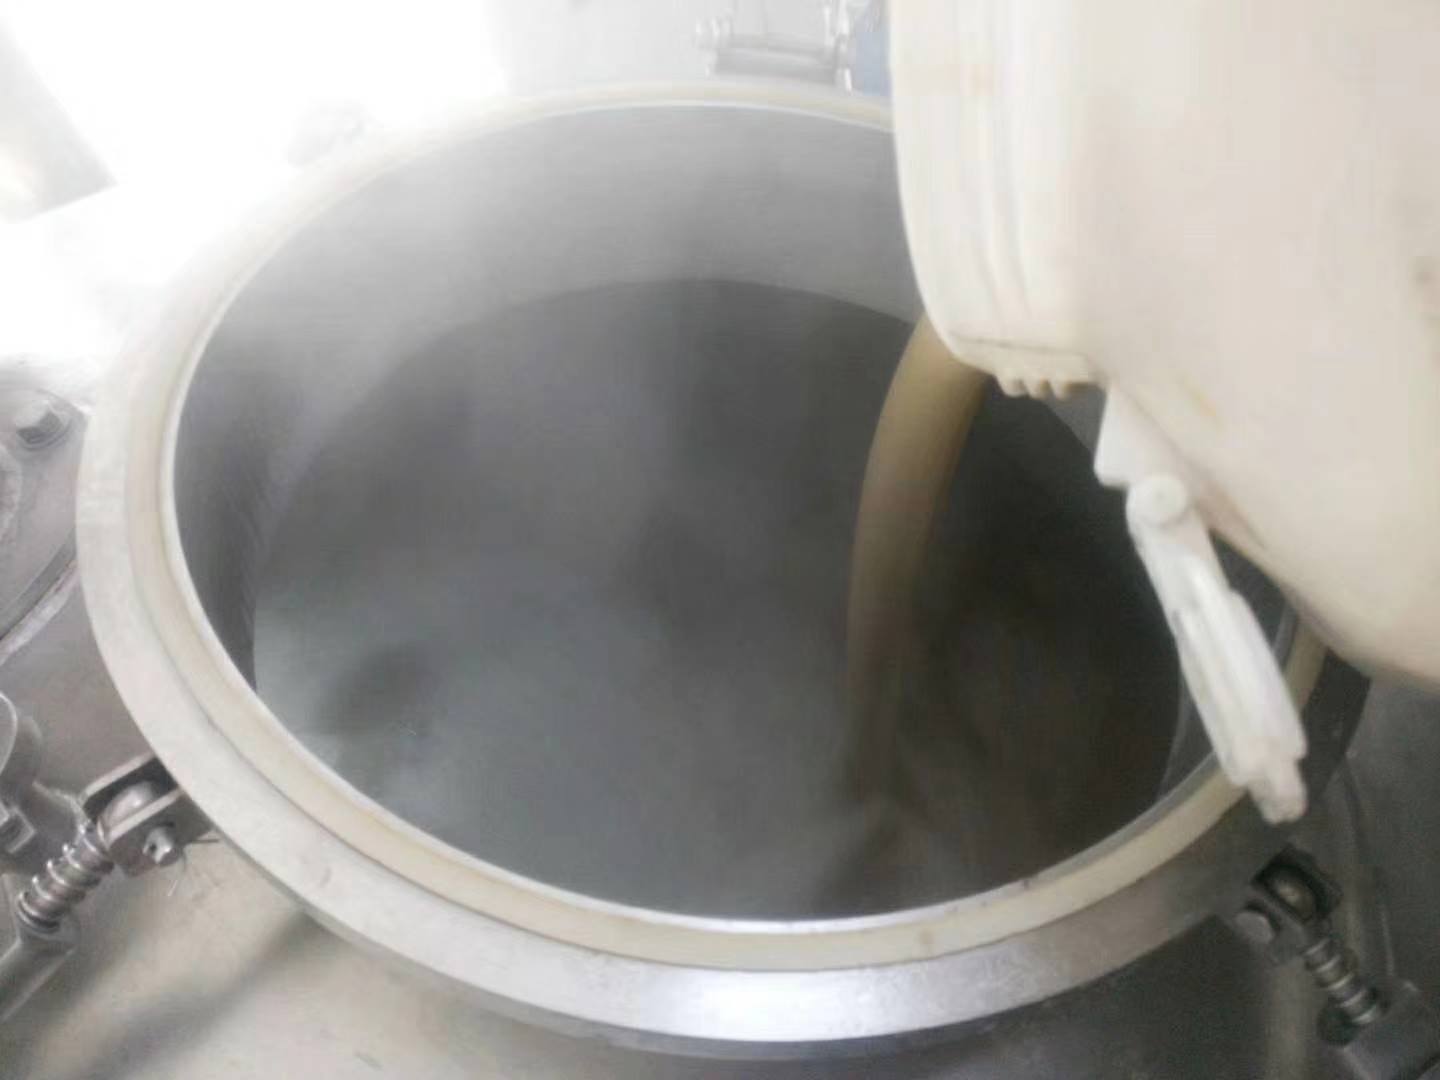 <b>What we should note when adding sugar into boiling wort?</b>